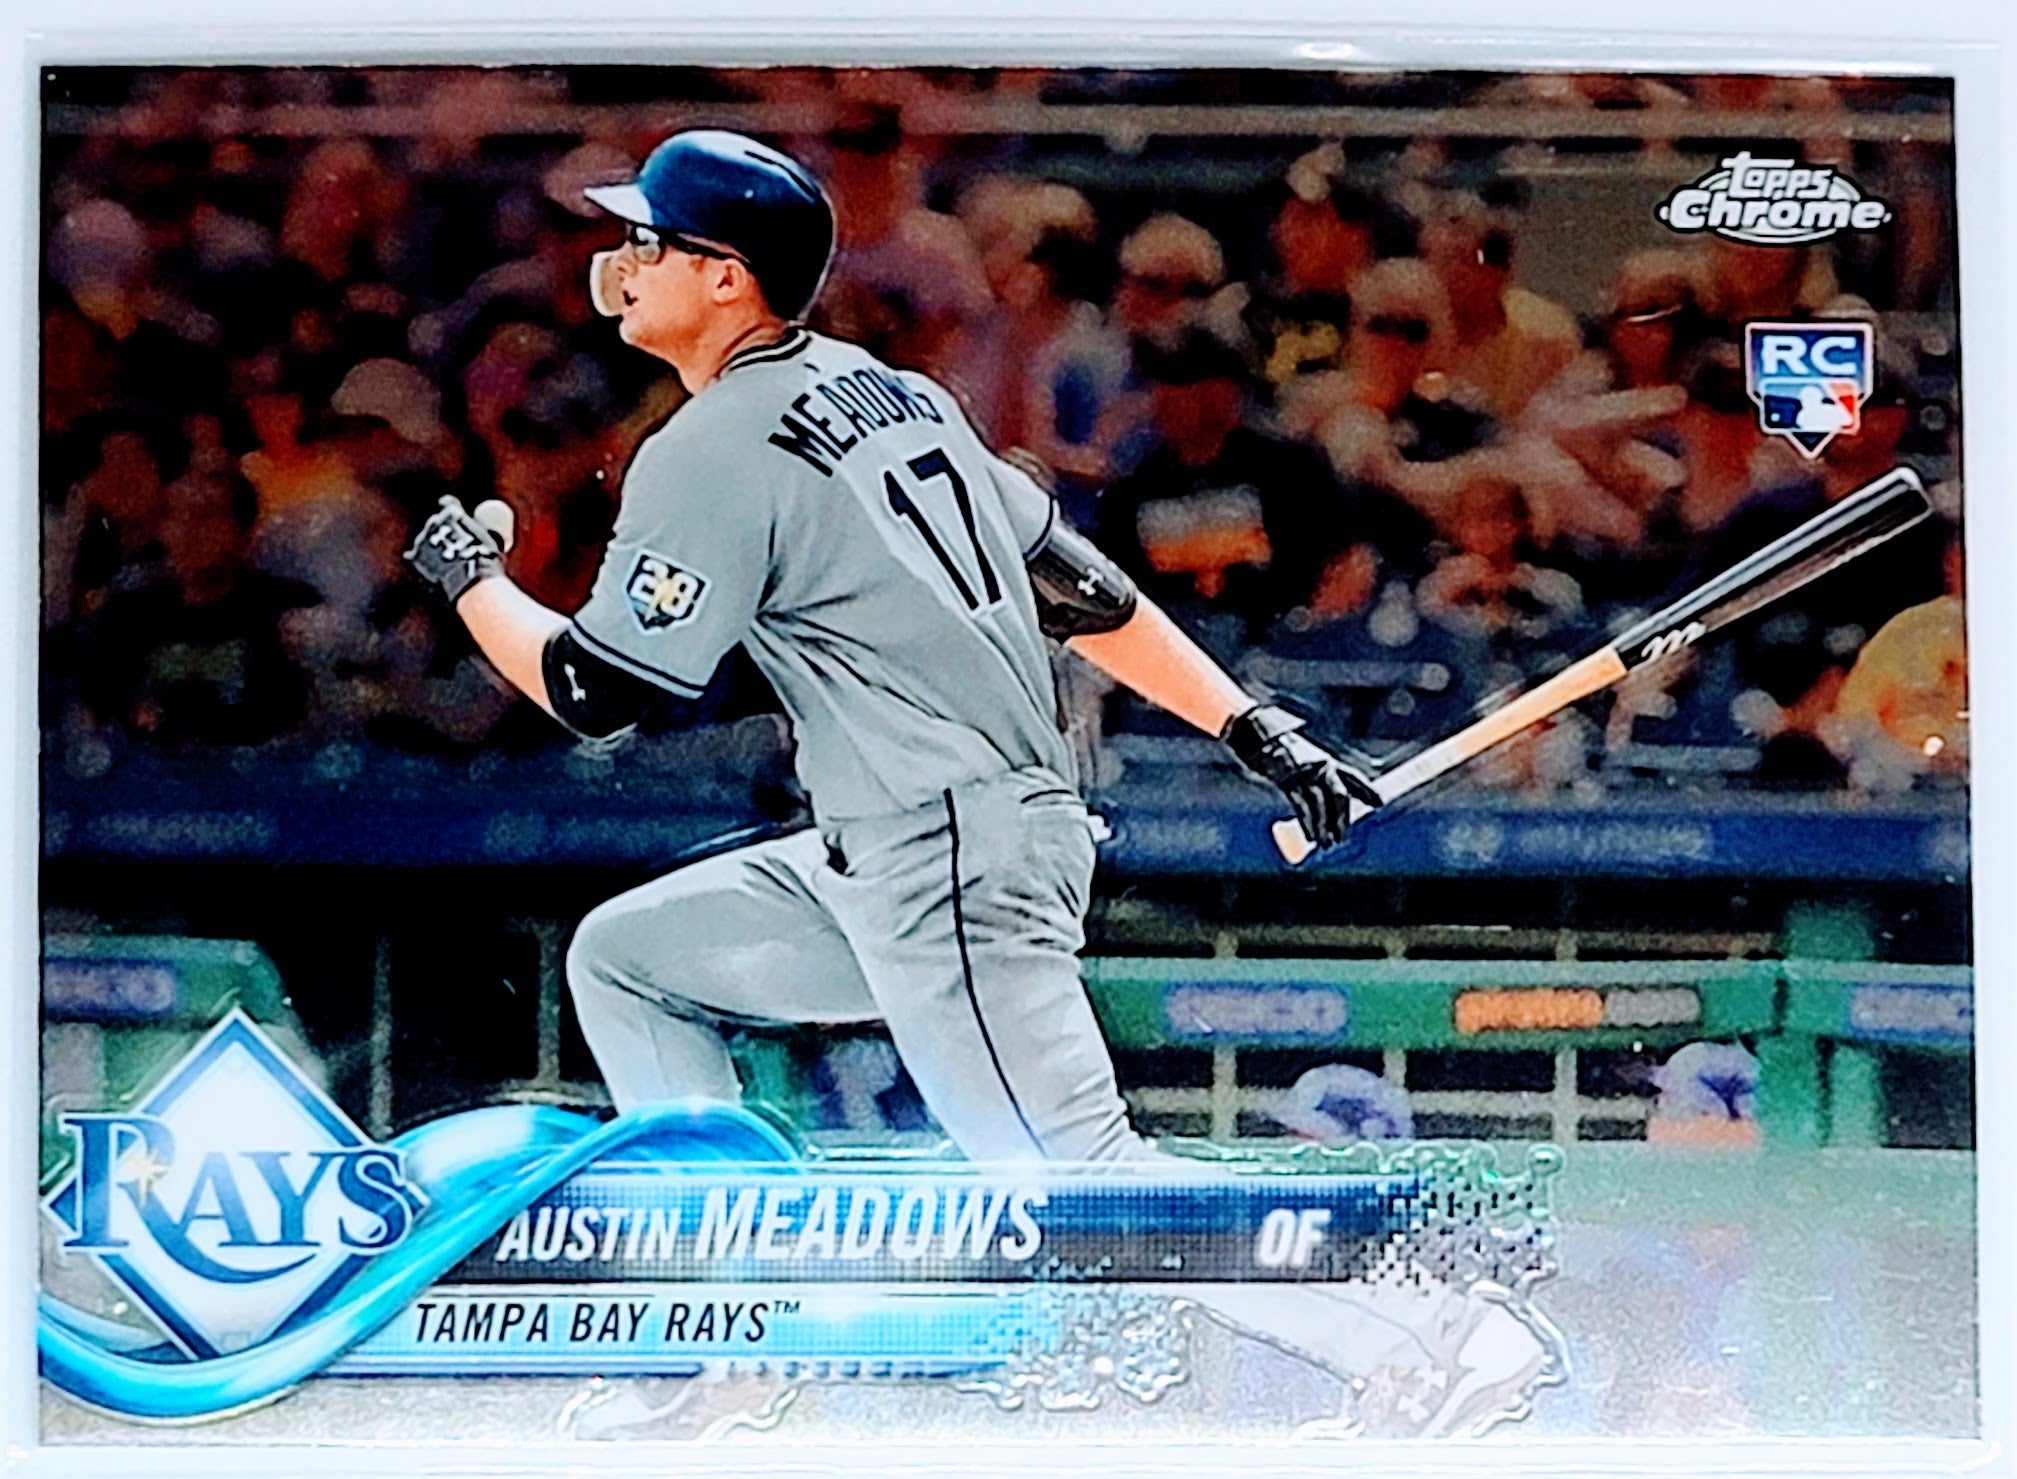 2018 Topps Chrome Update
  Edition Austin Meadows   RC Tampa Bay
  Rays Baseball Card TH1C4 simple Xclusive Collectibles   